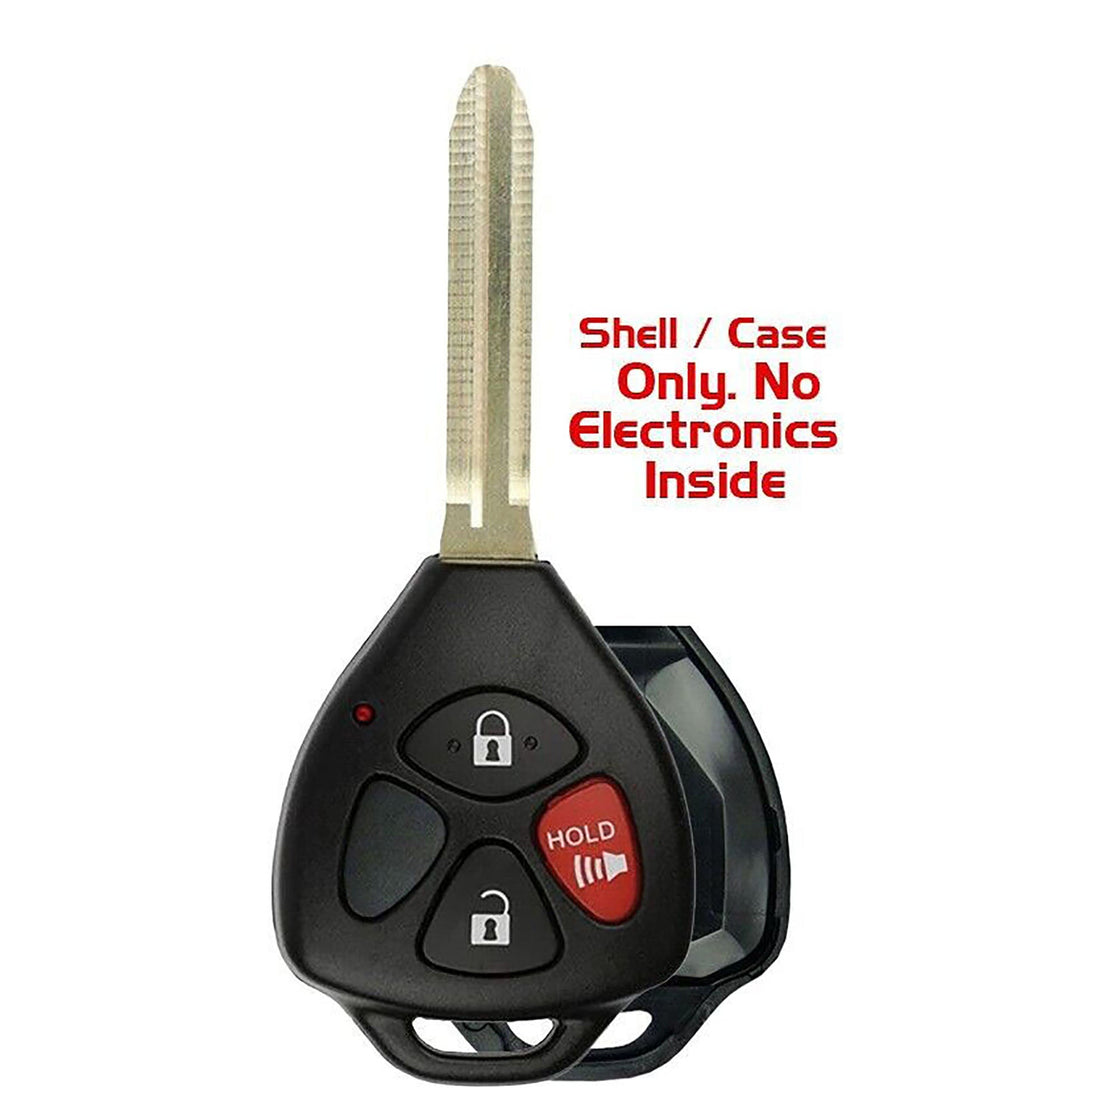 2007 Toyota Yaris Key fob Remote SHELL / CASE - (No Electronics or Chip Inside)